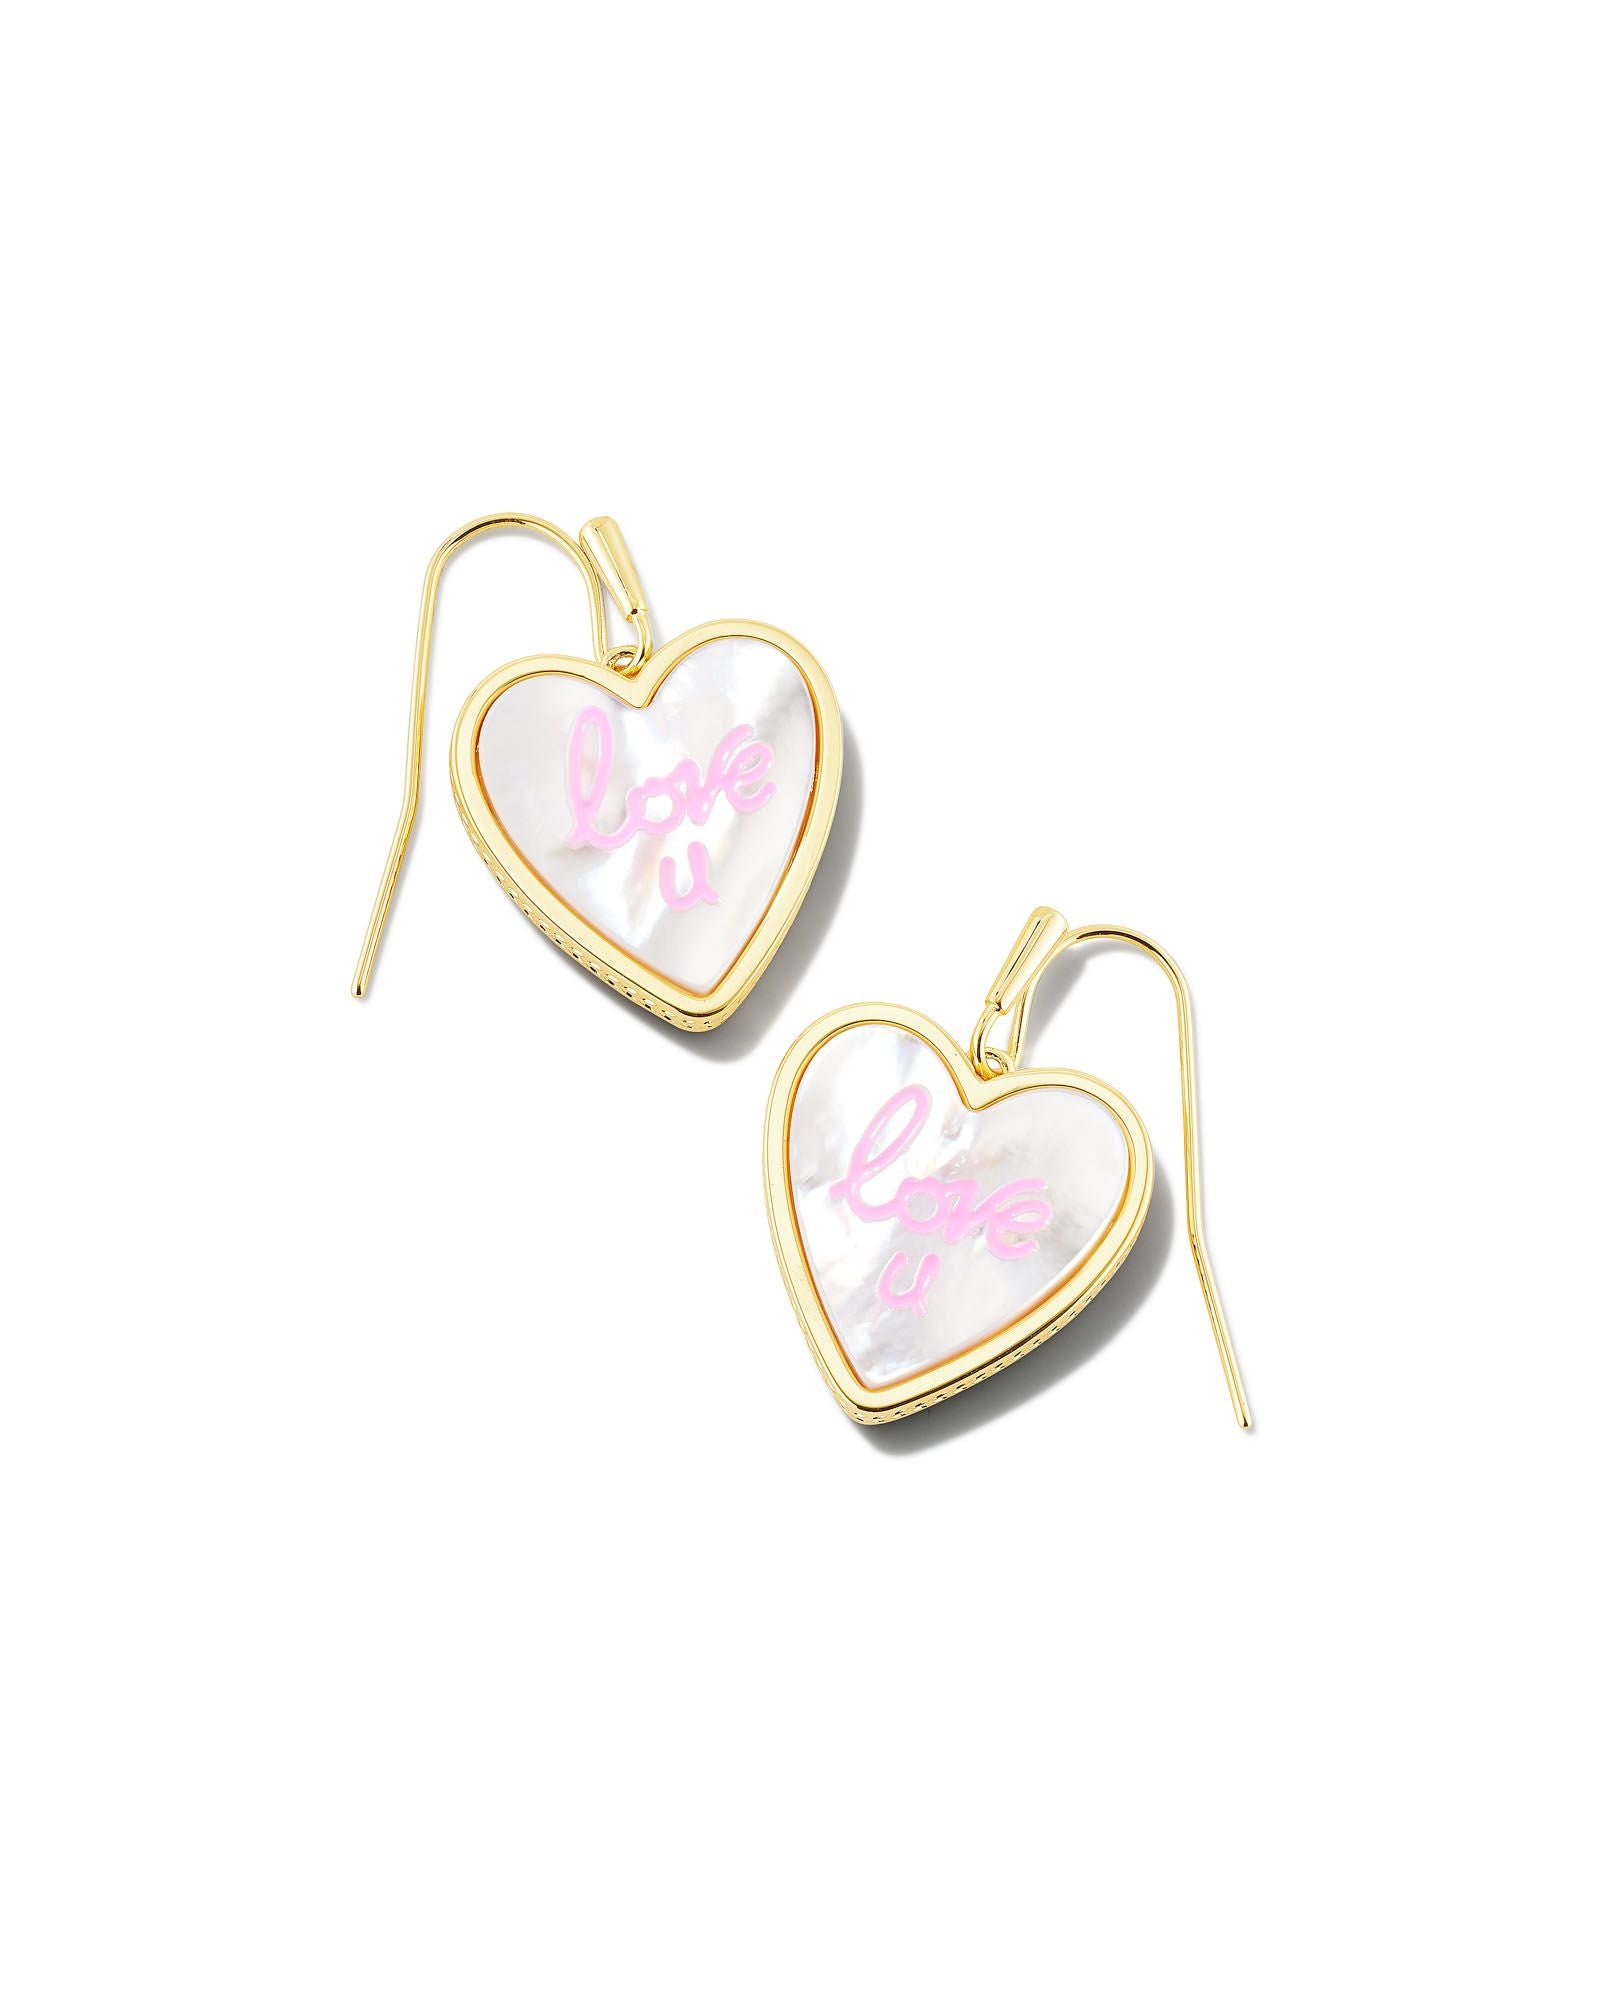 Kendra Scott | Love U Heart Gold Drop Earrings in Ivory Mother-of-Pearl - Giddy Up Glamour Boutique